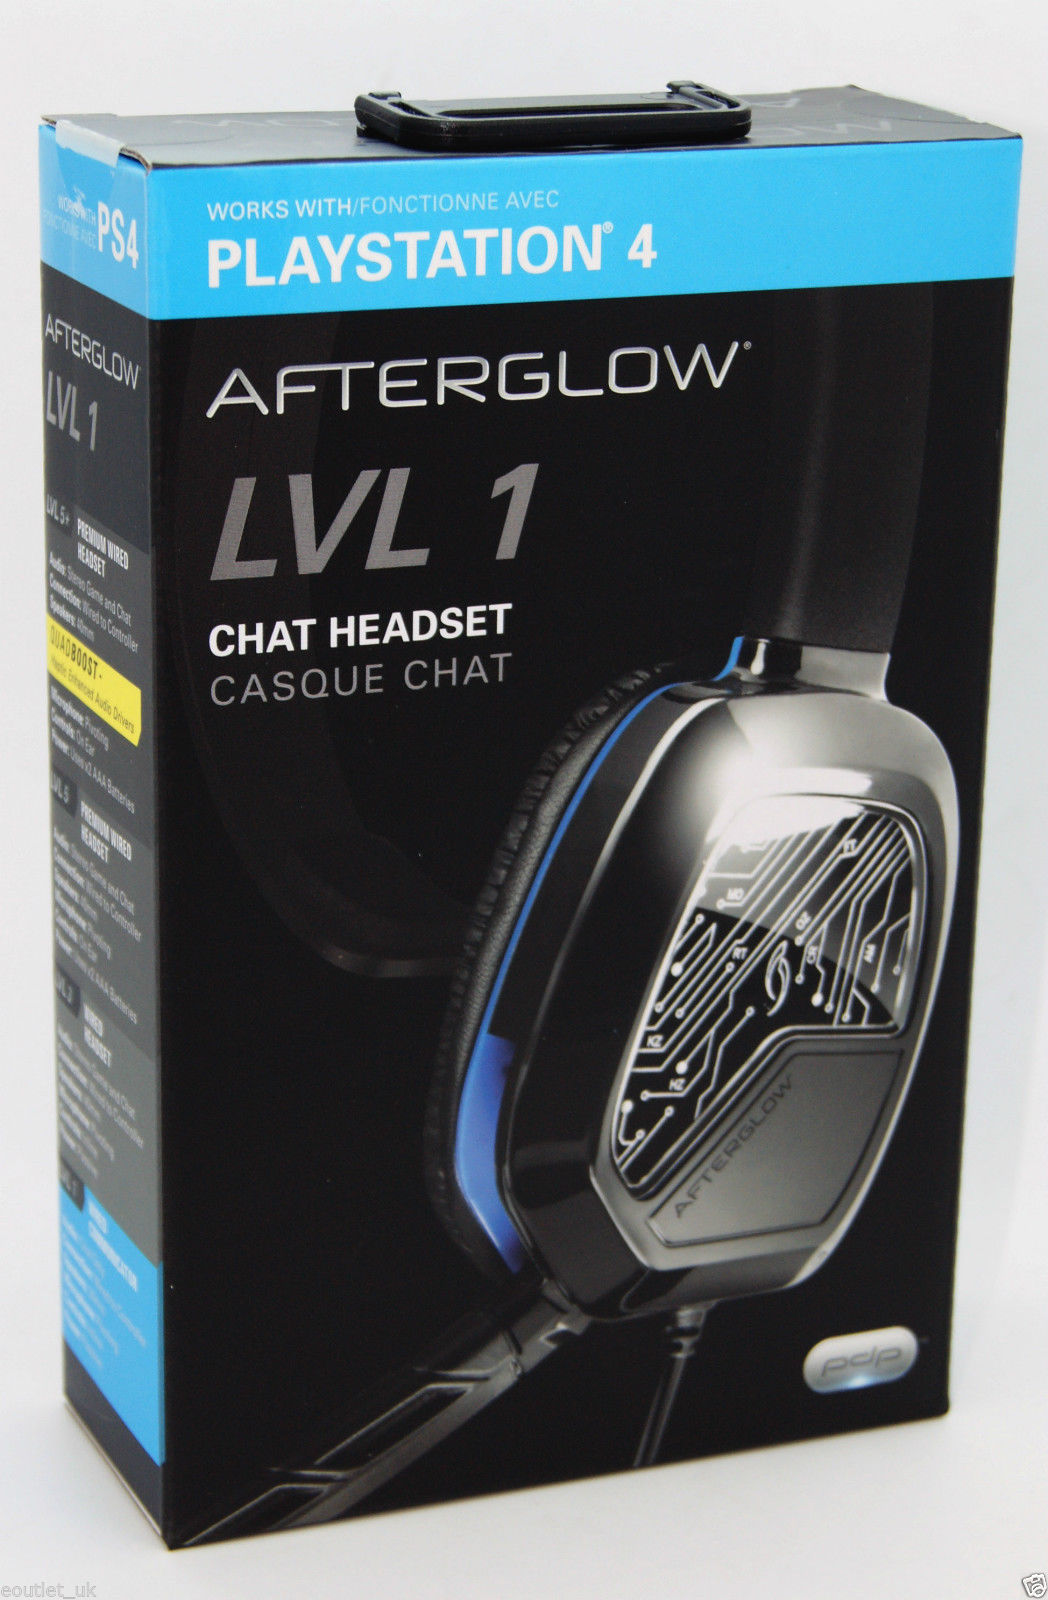 PS4 LVL 1 Chat Headset - Afterglow